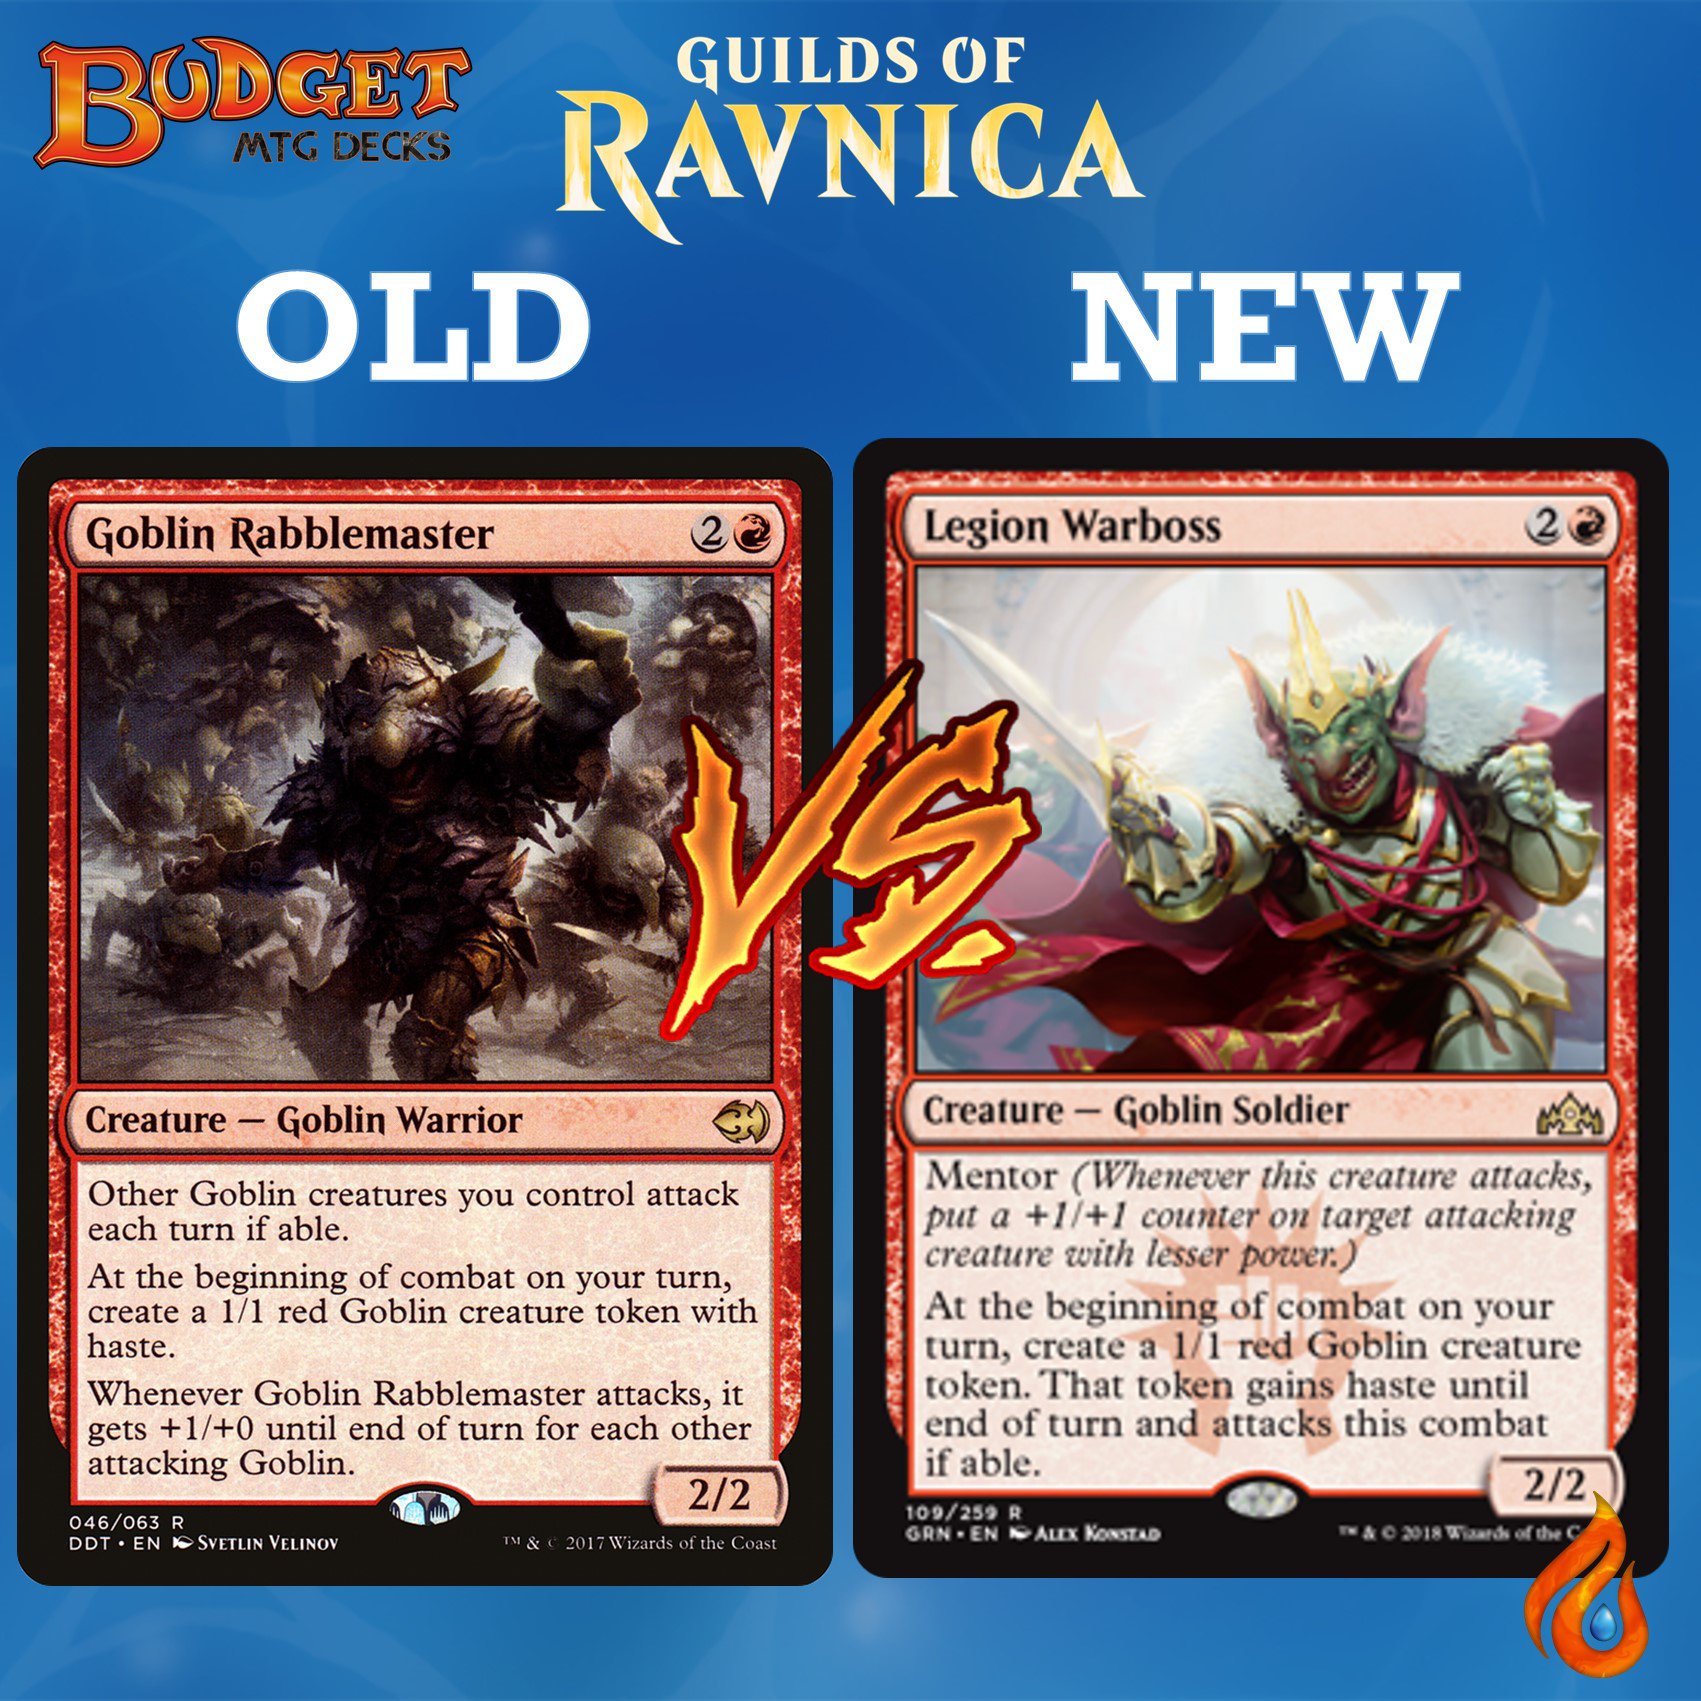 Budget MTG Decks on Twitter: "Our new Legion Warboss does not force the of our to attack and pumps a tiny goblin up but then again doesn't pump itself